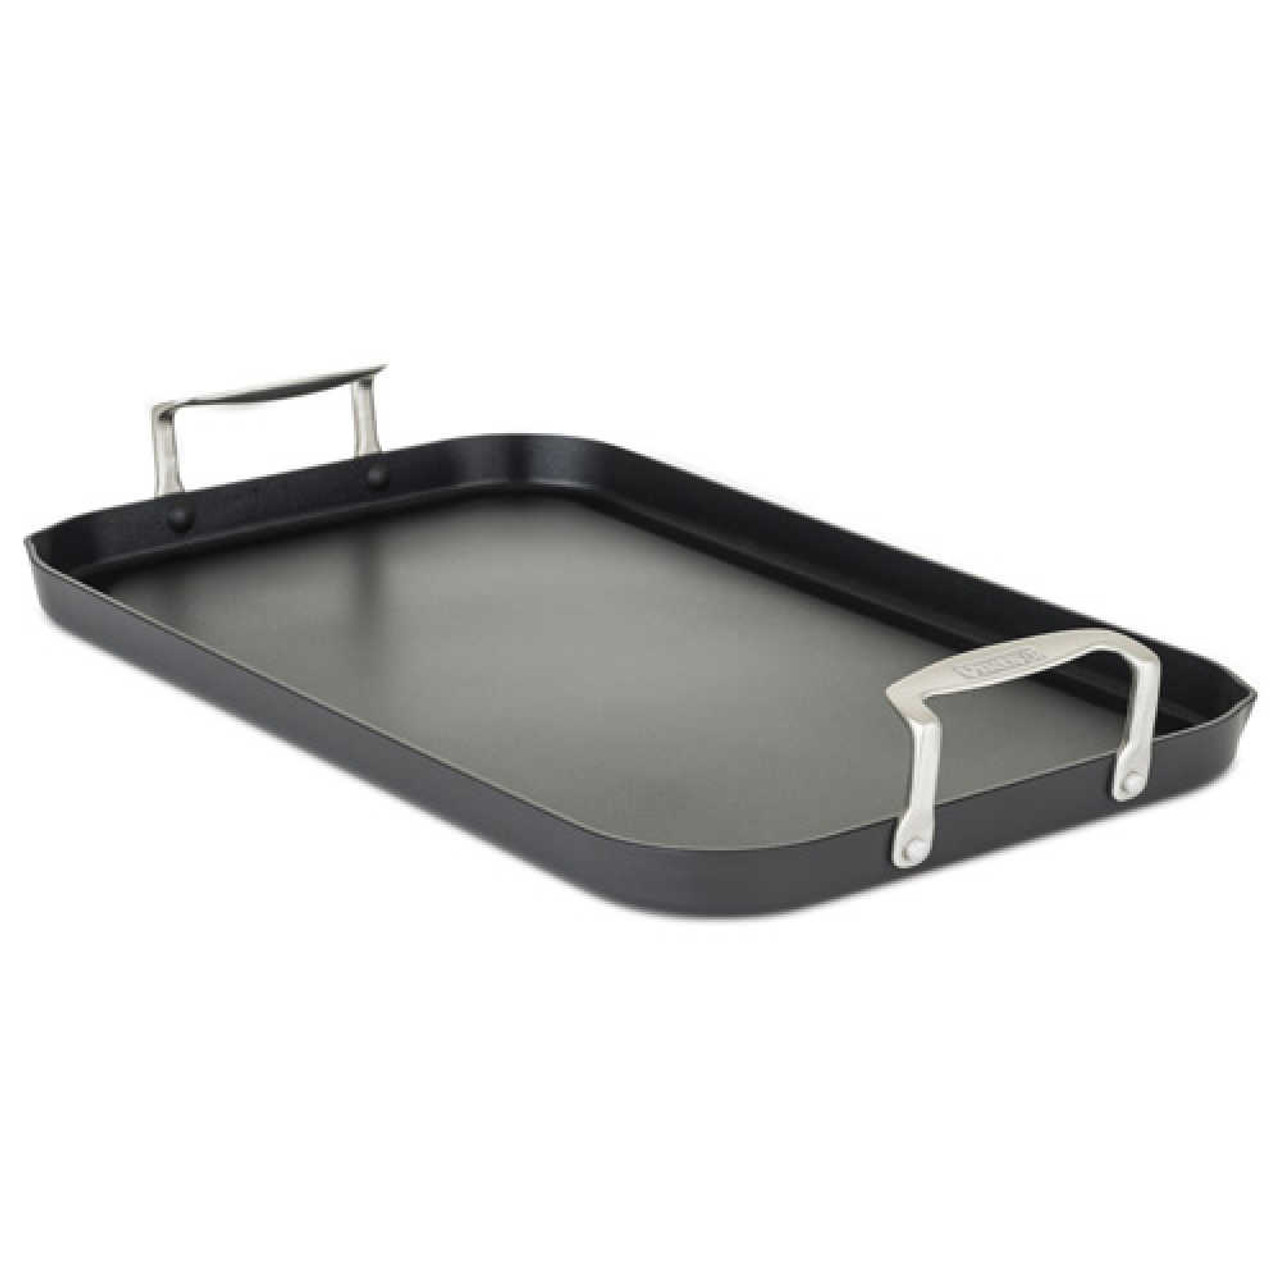 Staub Cast-Iron Double Burner Griddle Pan in 2023  Double burner, Cast iron  grill, How to make breakfast